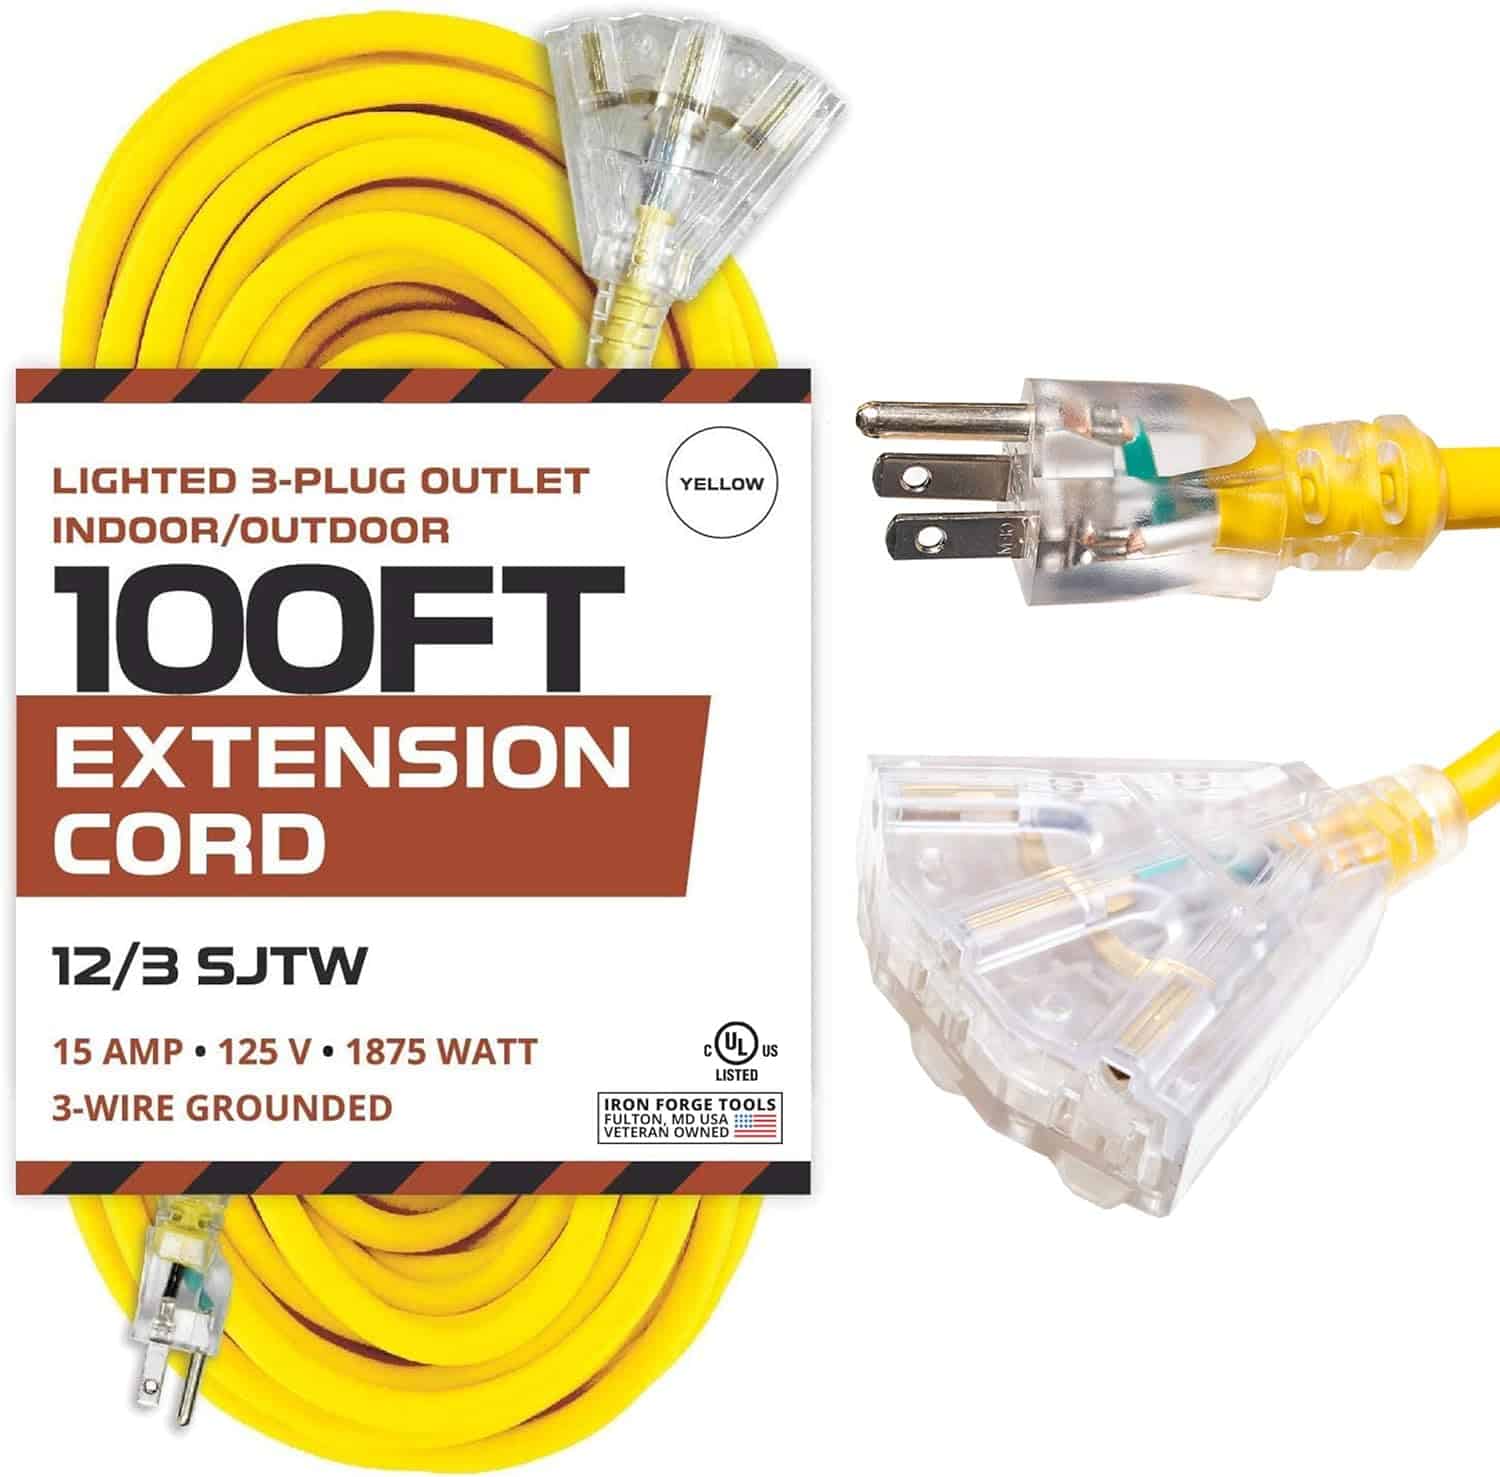 Iron-Forge-Cable-100ft-Outdoor-Extension-Cord-Lighted-with-3-Electrical-Power-Outlets-12-3-Gauge-SJTW-Heavy-Duty-Extension-Cable-Yellow-15-AMP-3-Pronged-with-Grounded-Plug-for-Improved-Safety